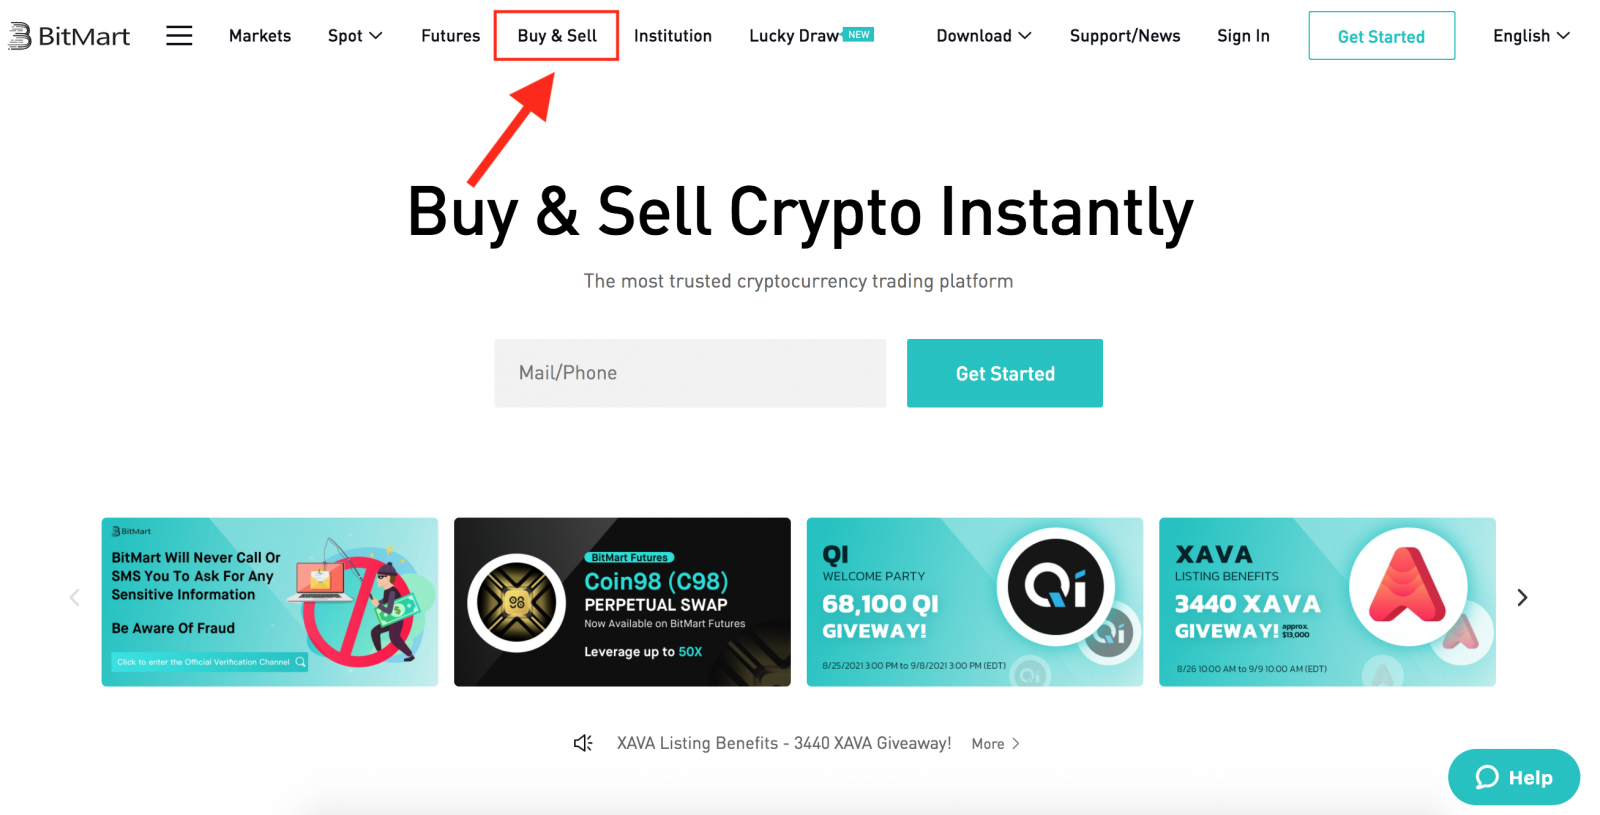 How to Buy Coins with MoonPay in BitMart